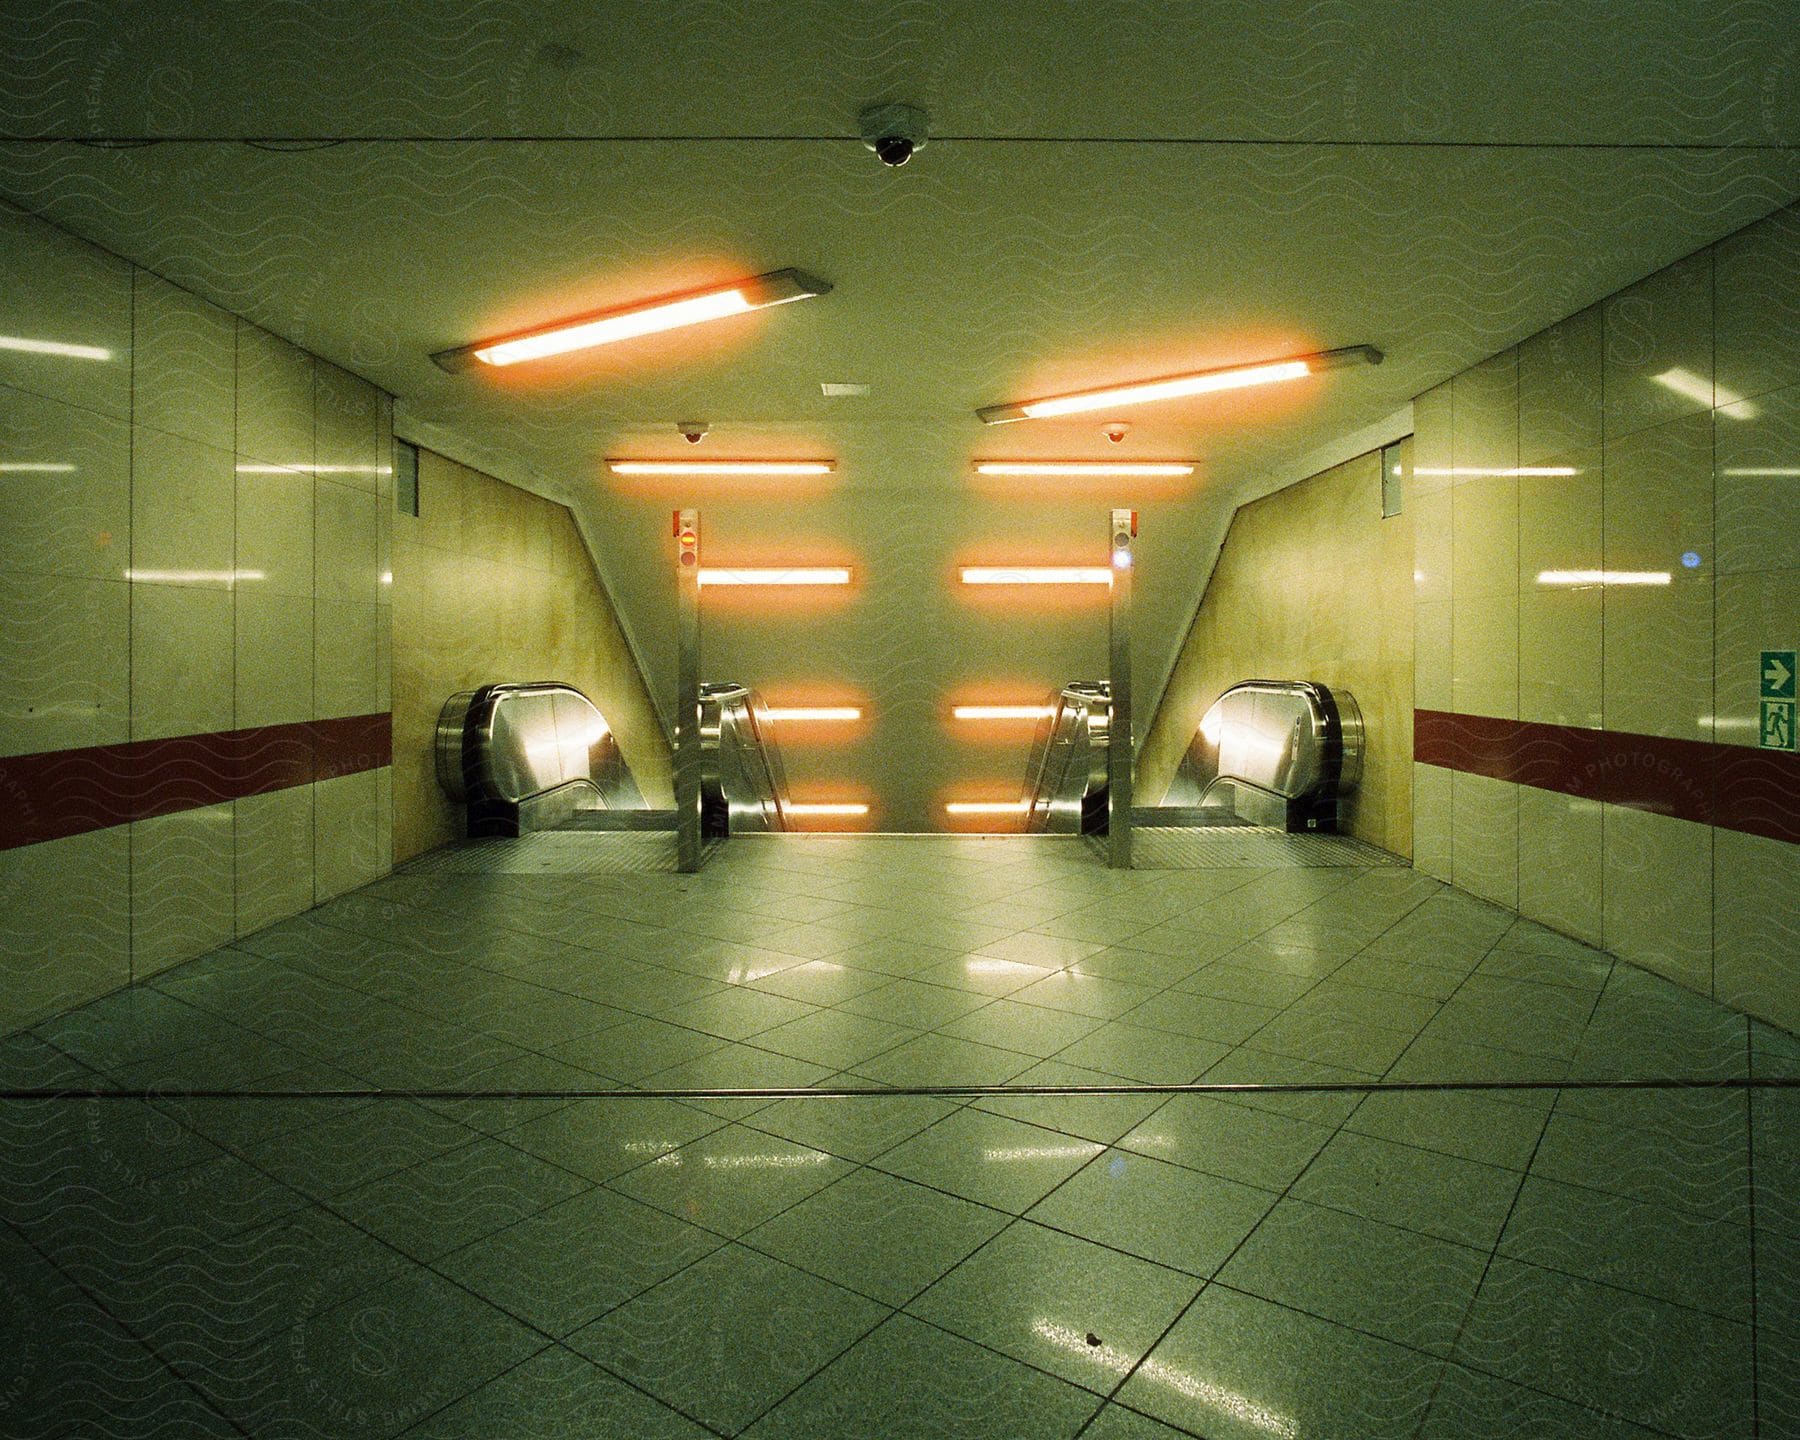 Bright orange lights reflecting on the floor and walls of a subway station in berlin